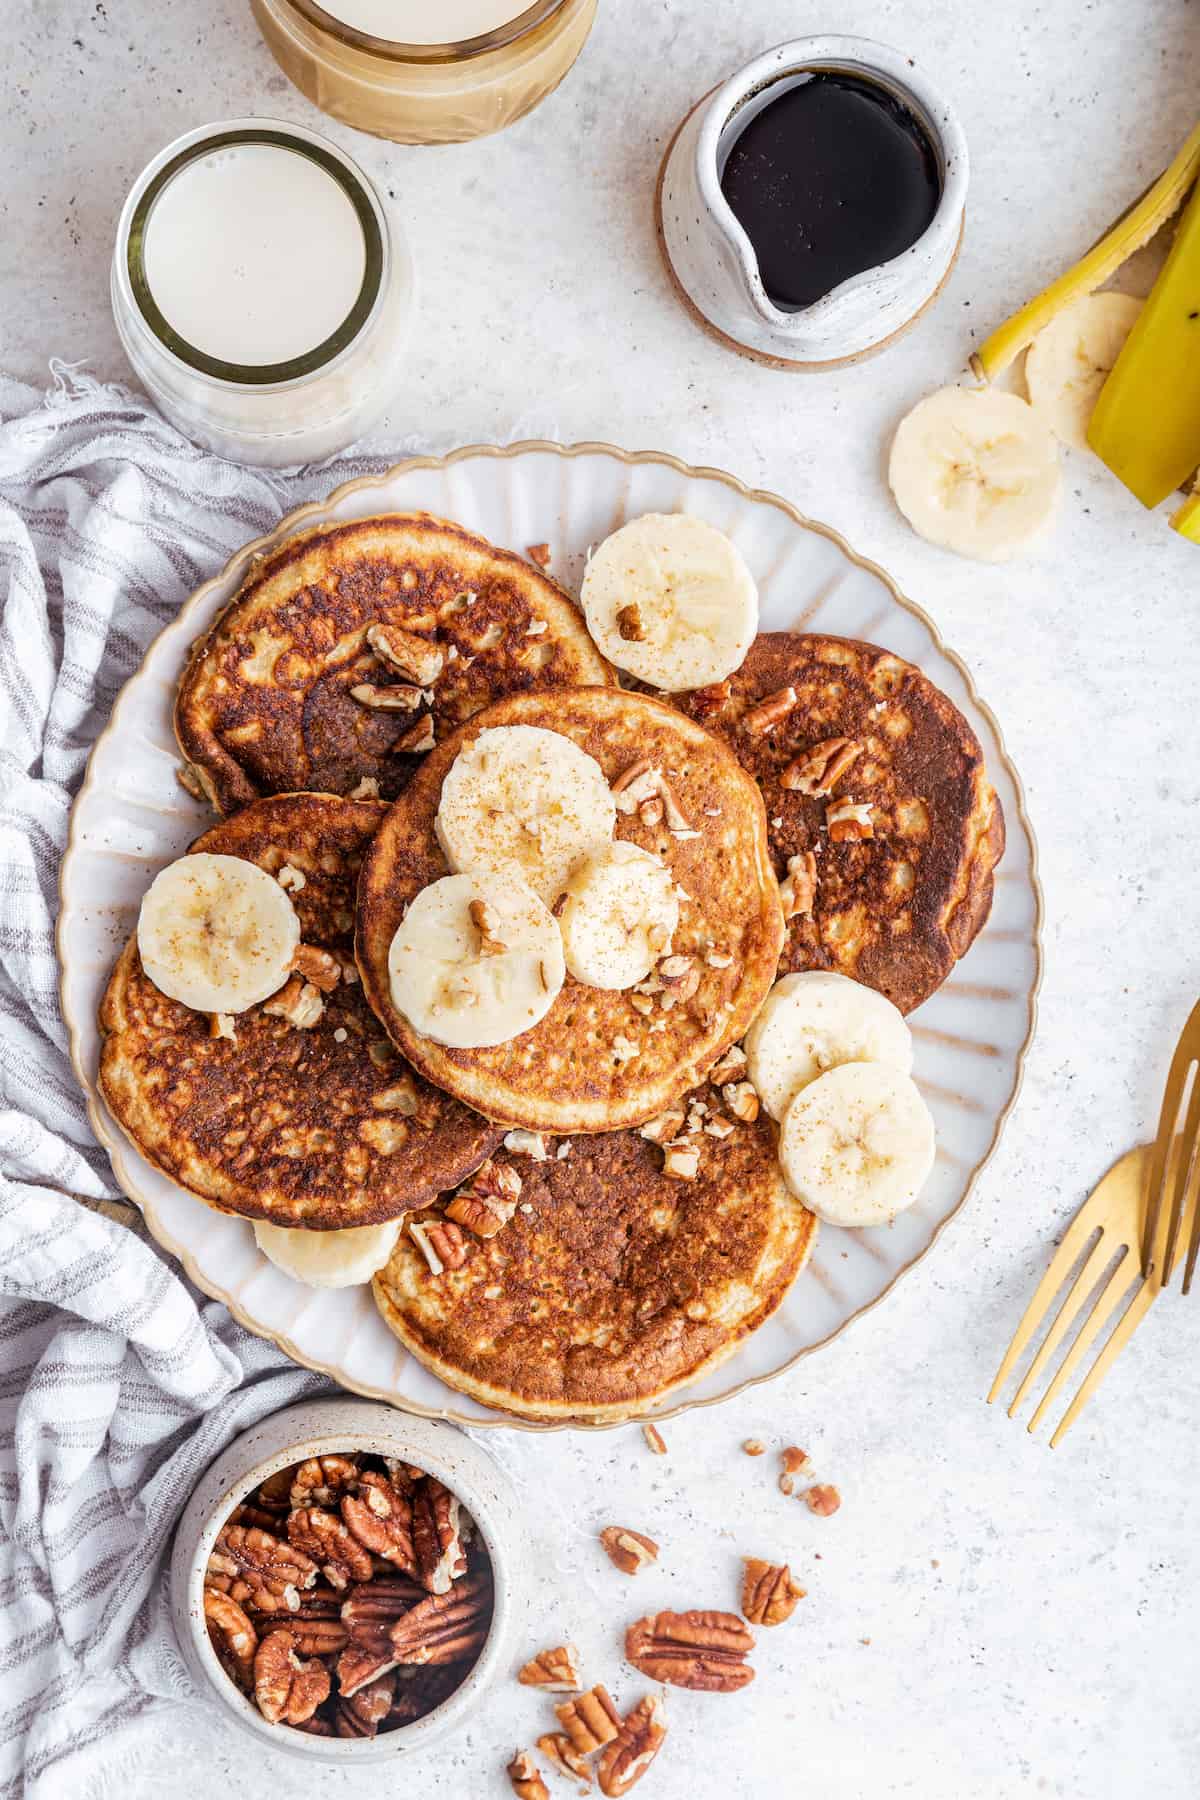 Overhead view of oatmeal banana pancakes on plate with pecans and bananas